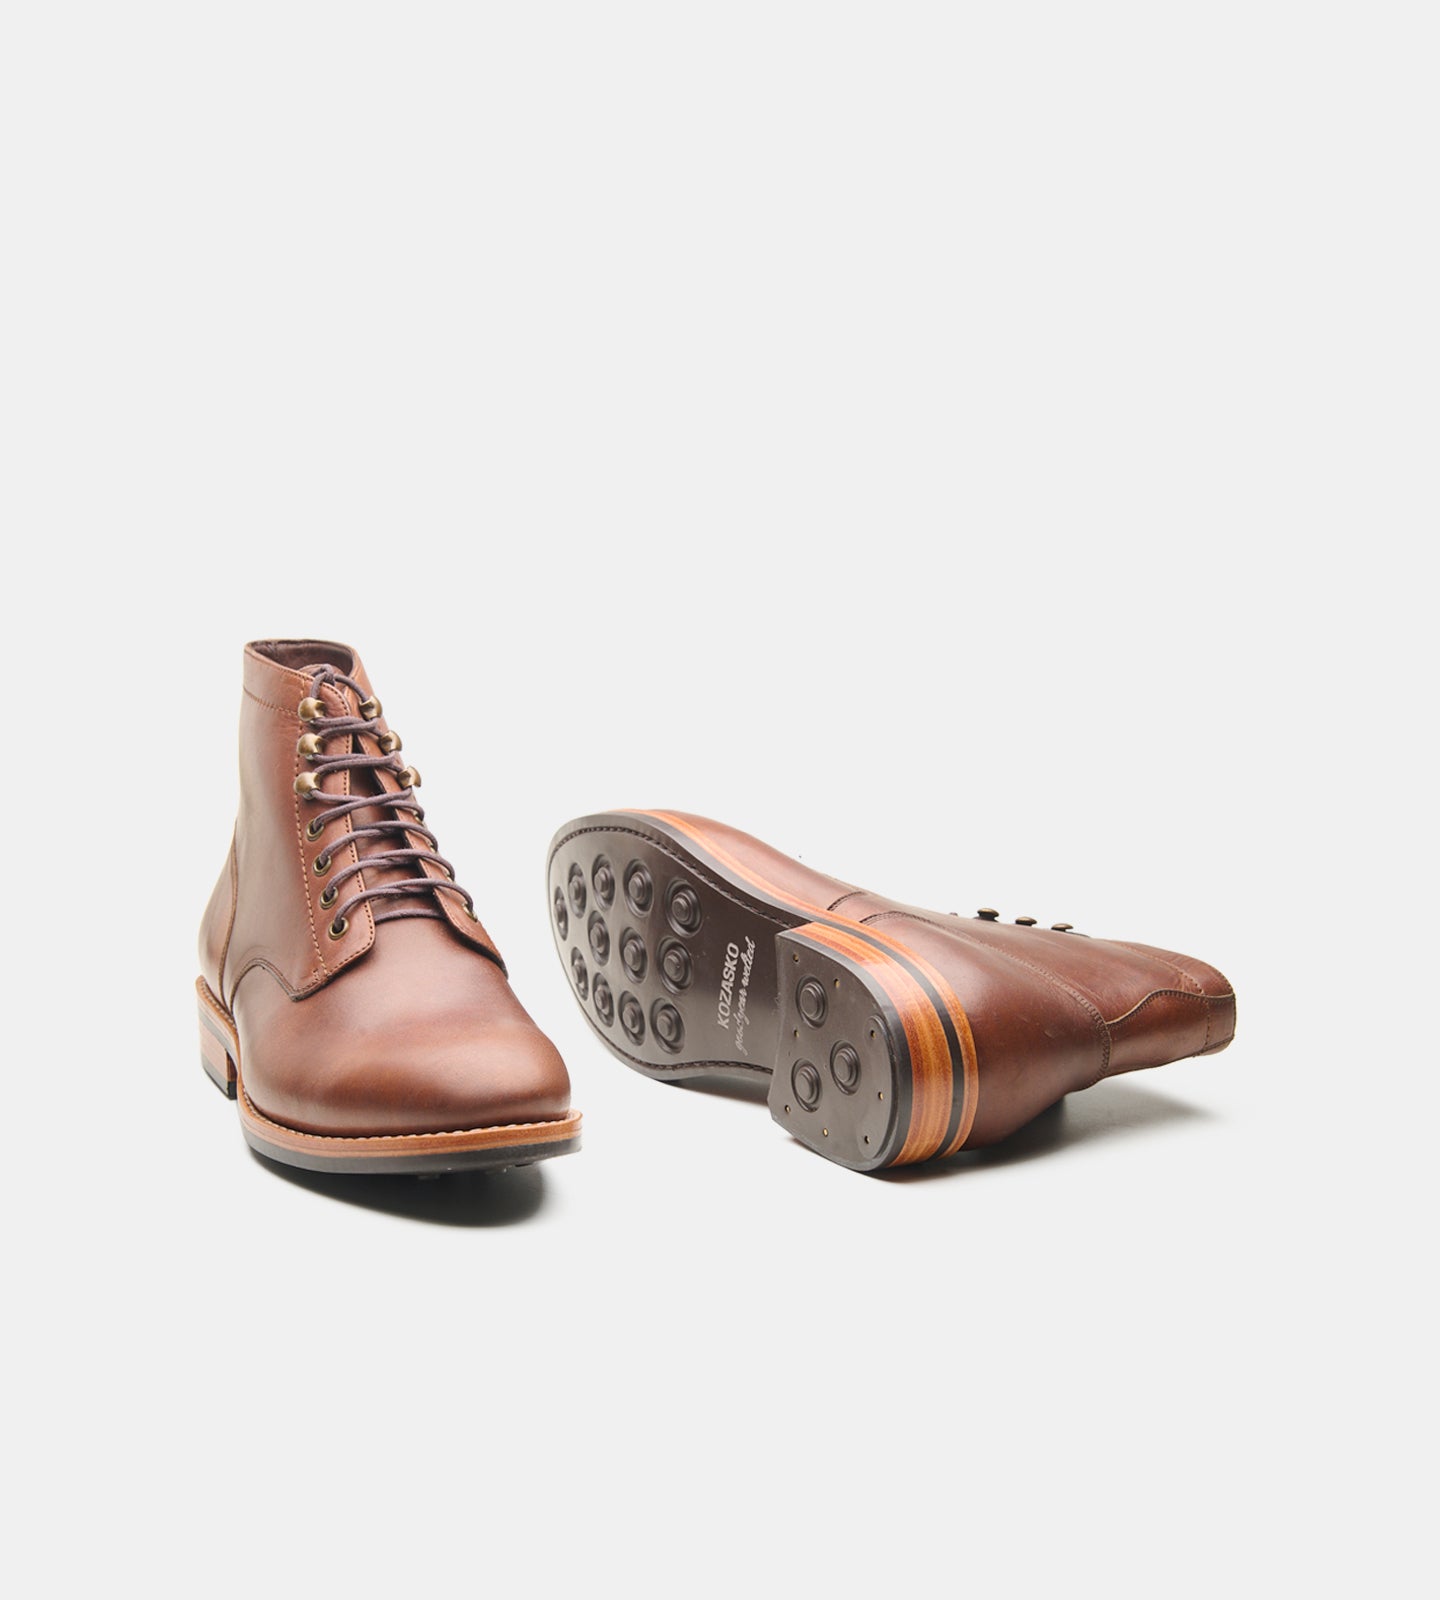 Goodyear Welted Plain Toe Boots